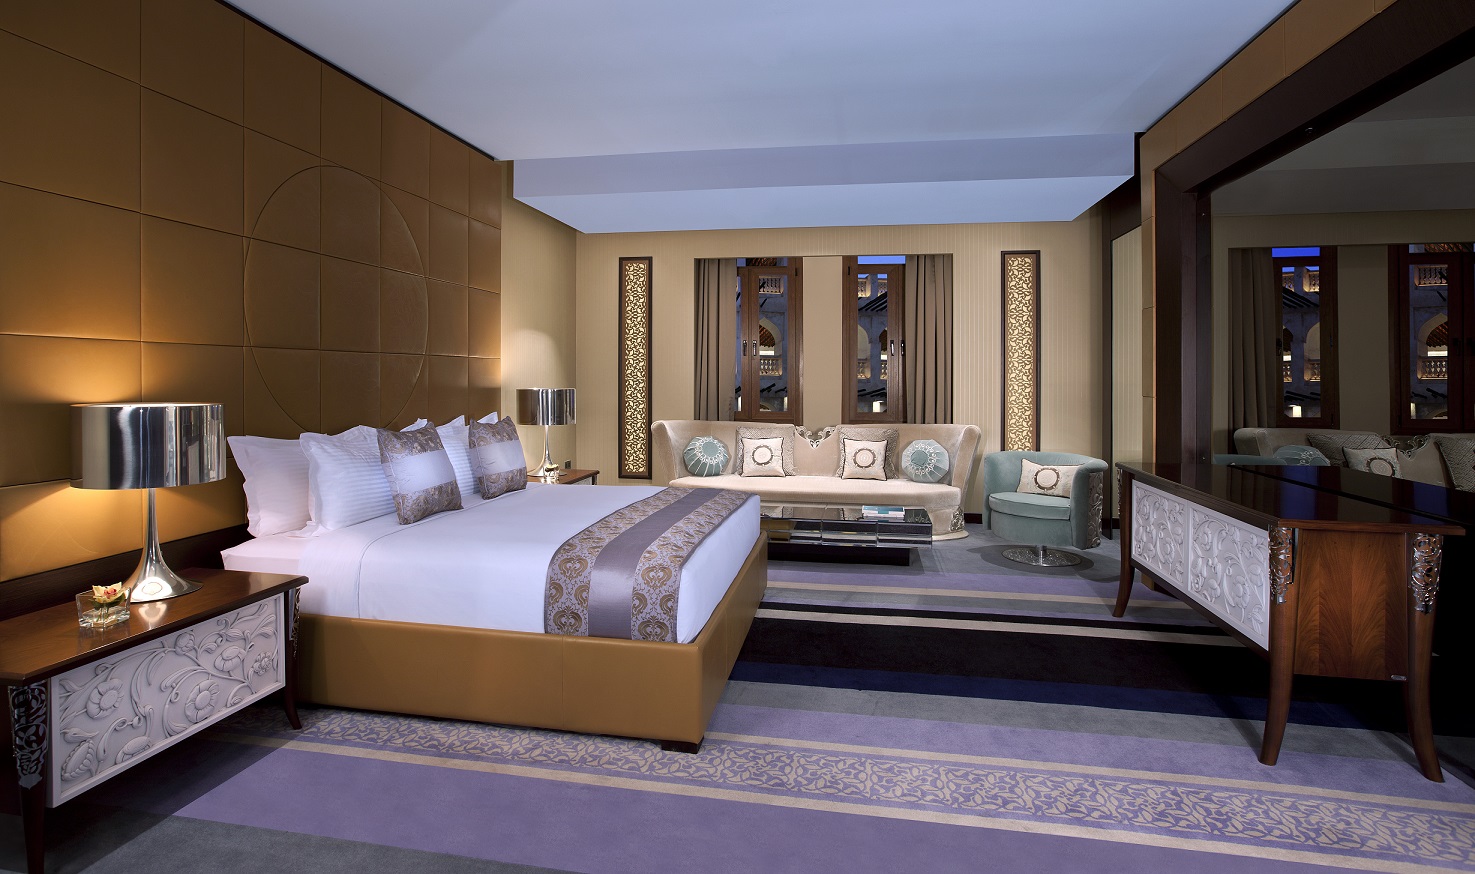 Souq Waqif Boutique Hotels and Al Najada Hotel Introduce a Bundle of Exquisite Offers